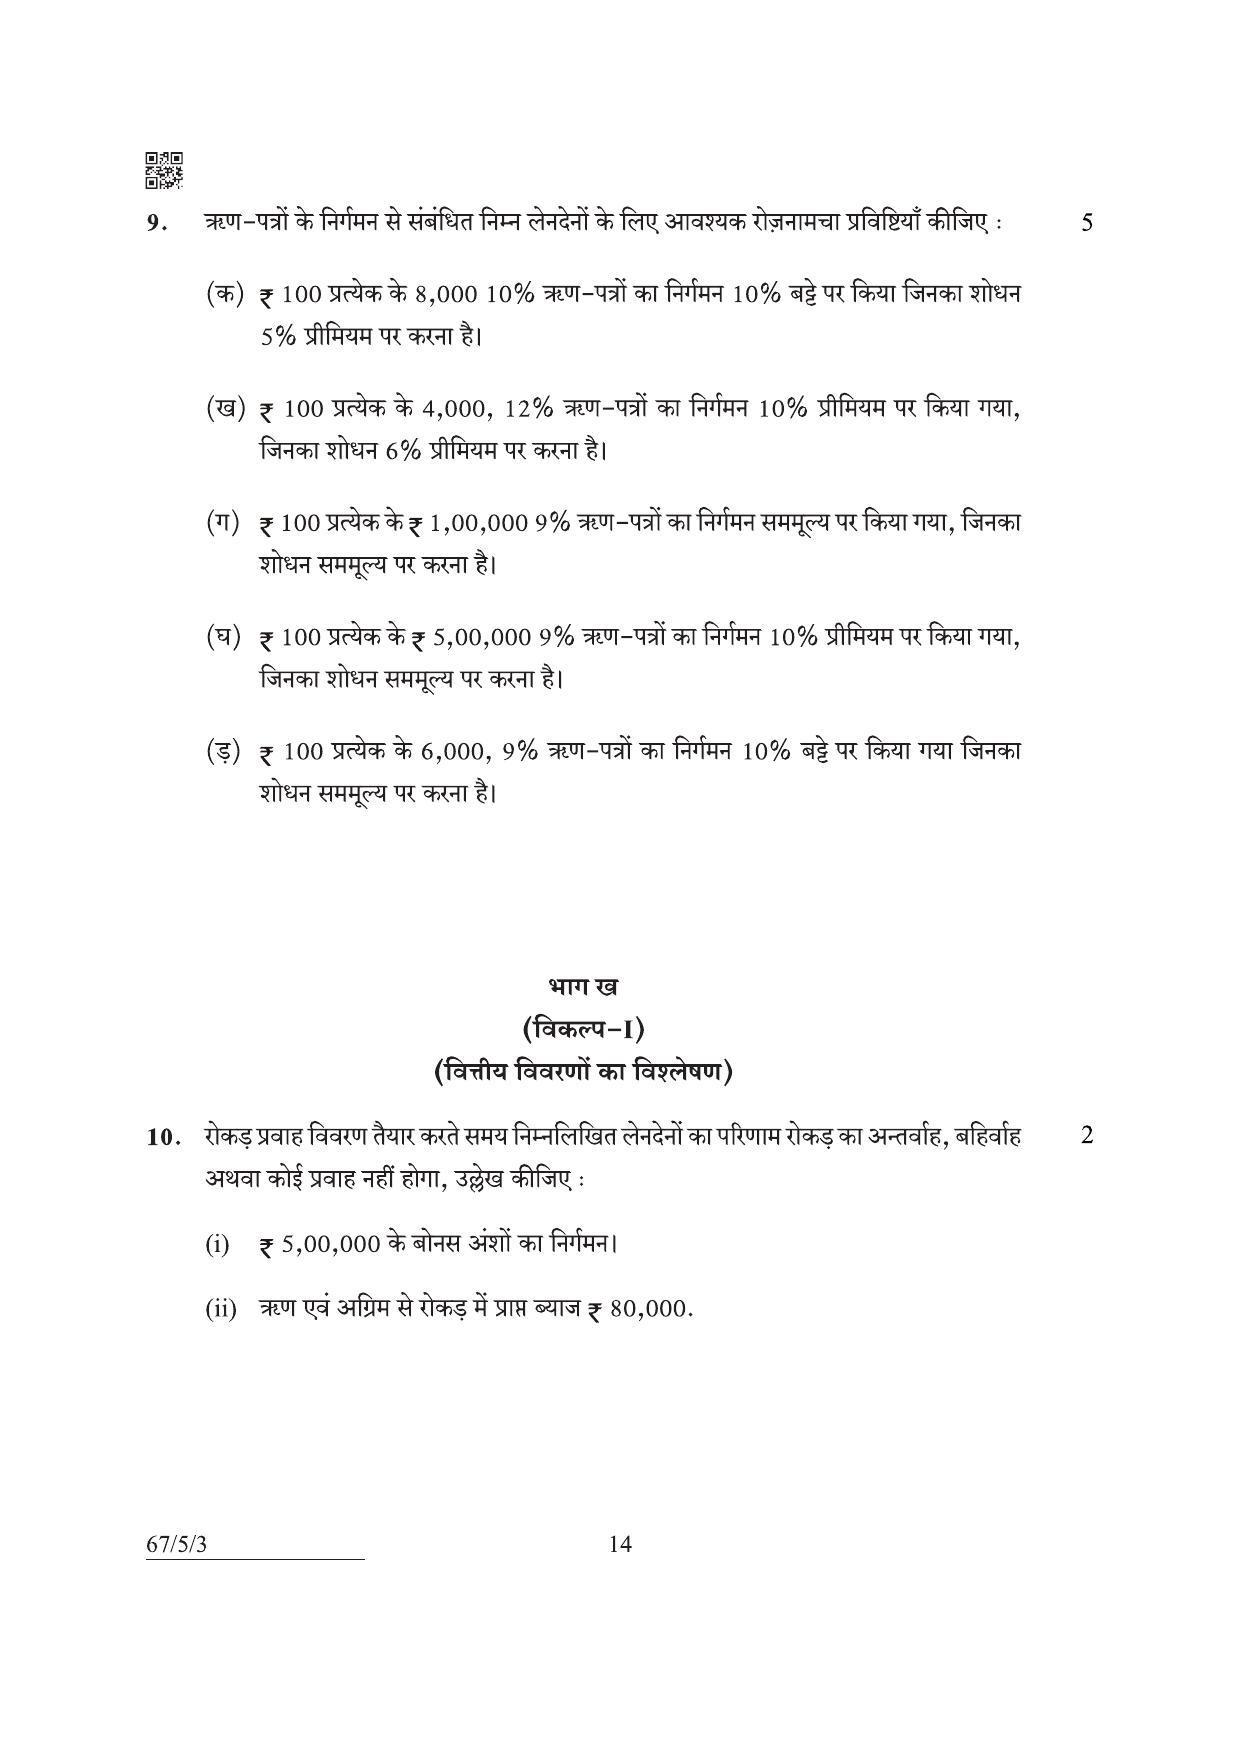 CBSE Class 12 67-5-3 Accountancy 2022 Question Paper - Page 14